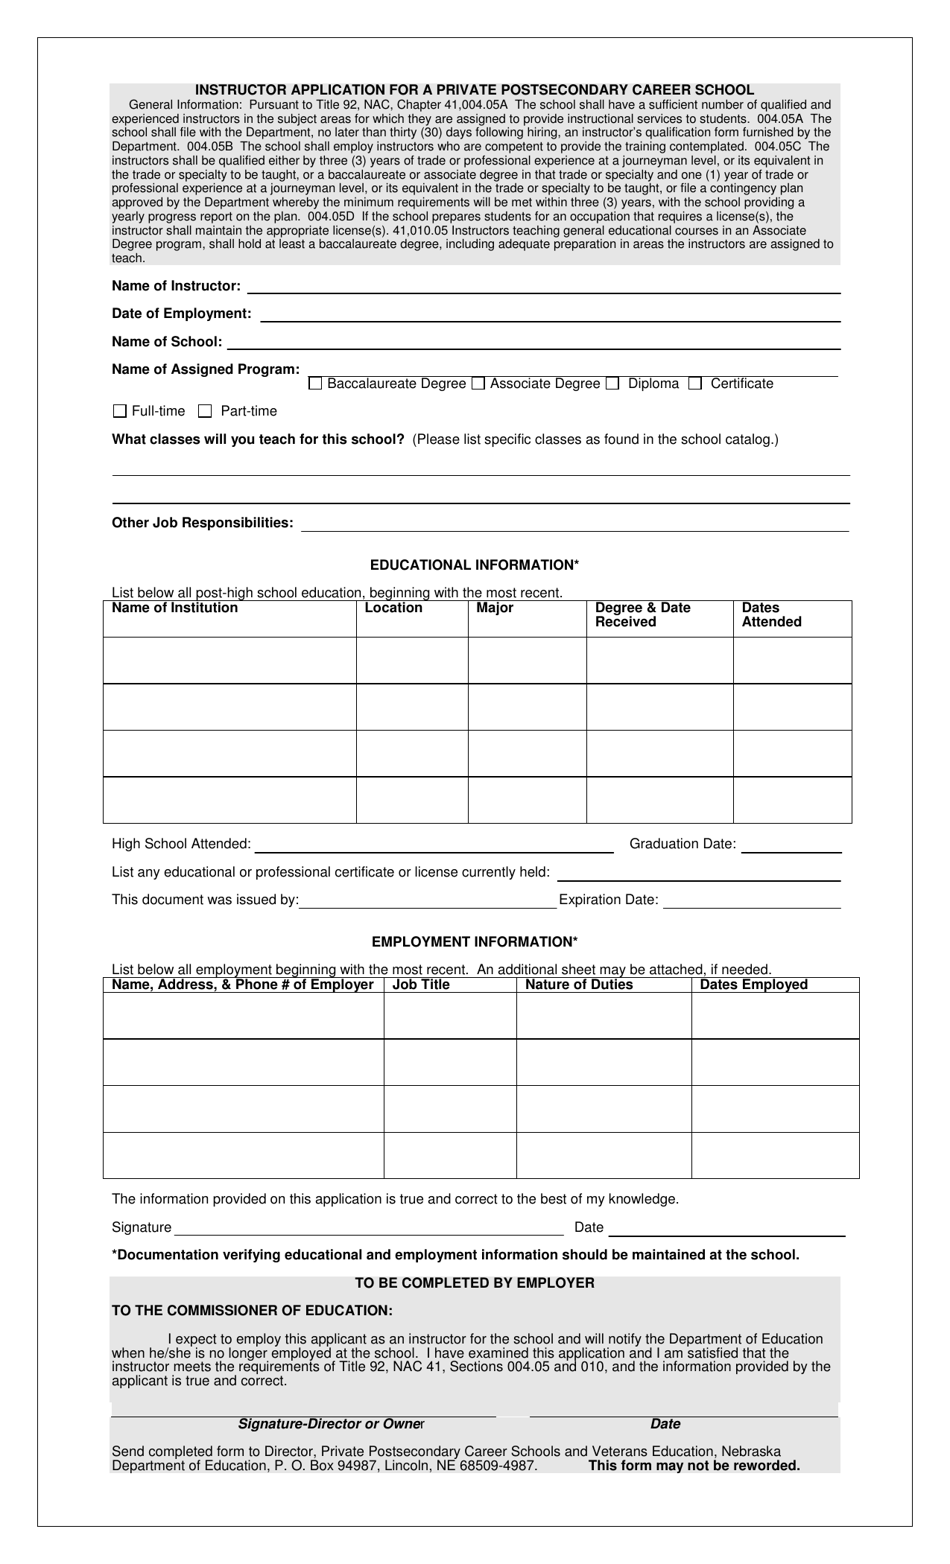 Instructor Application for a Private Postsecondary Career School - Nebraska, Page 1